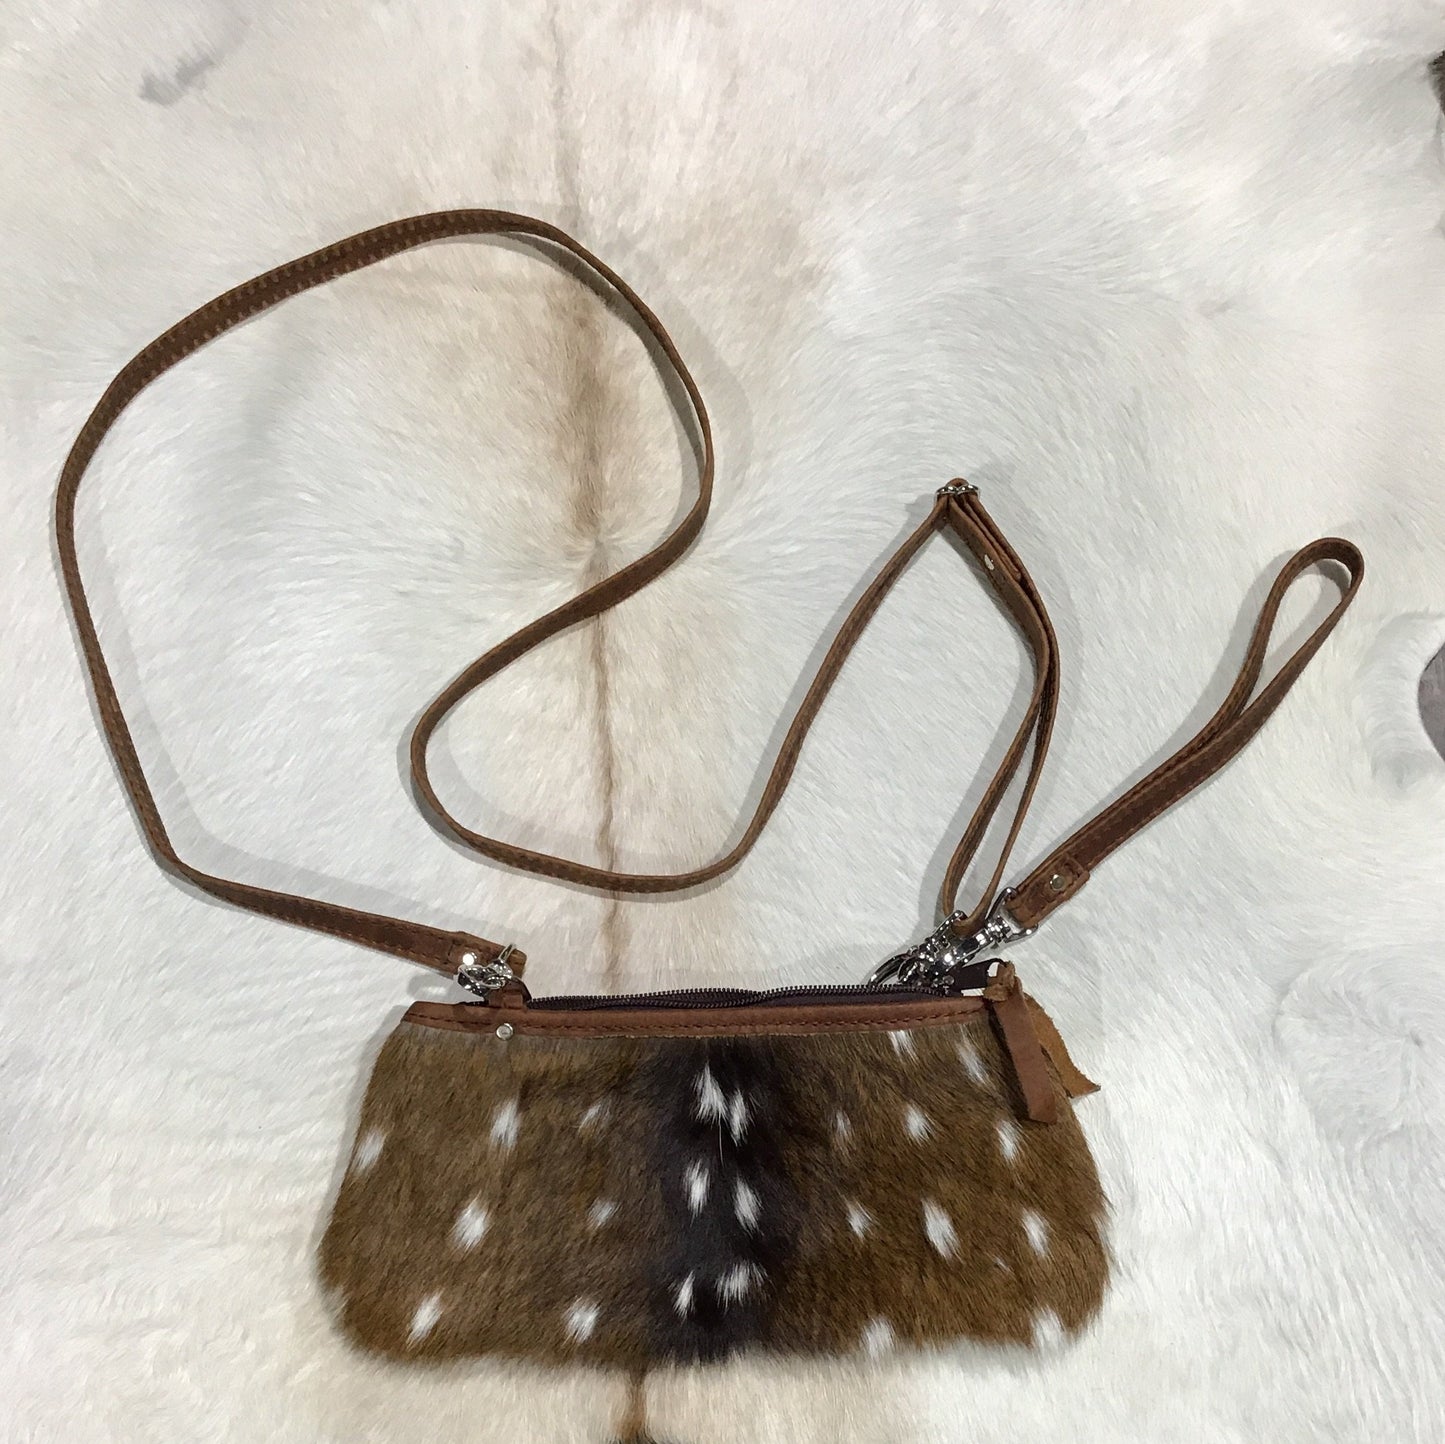 DOUBLE J SADDLERY LITTLE CLUTCH AXIS PURSE